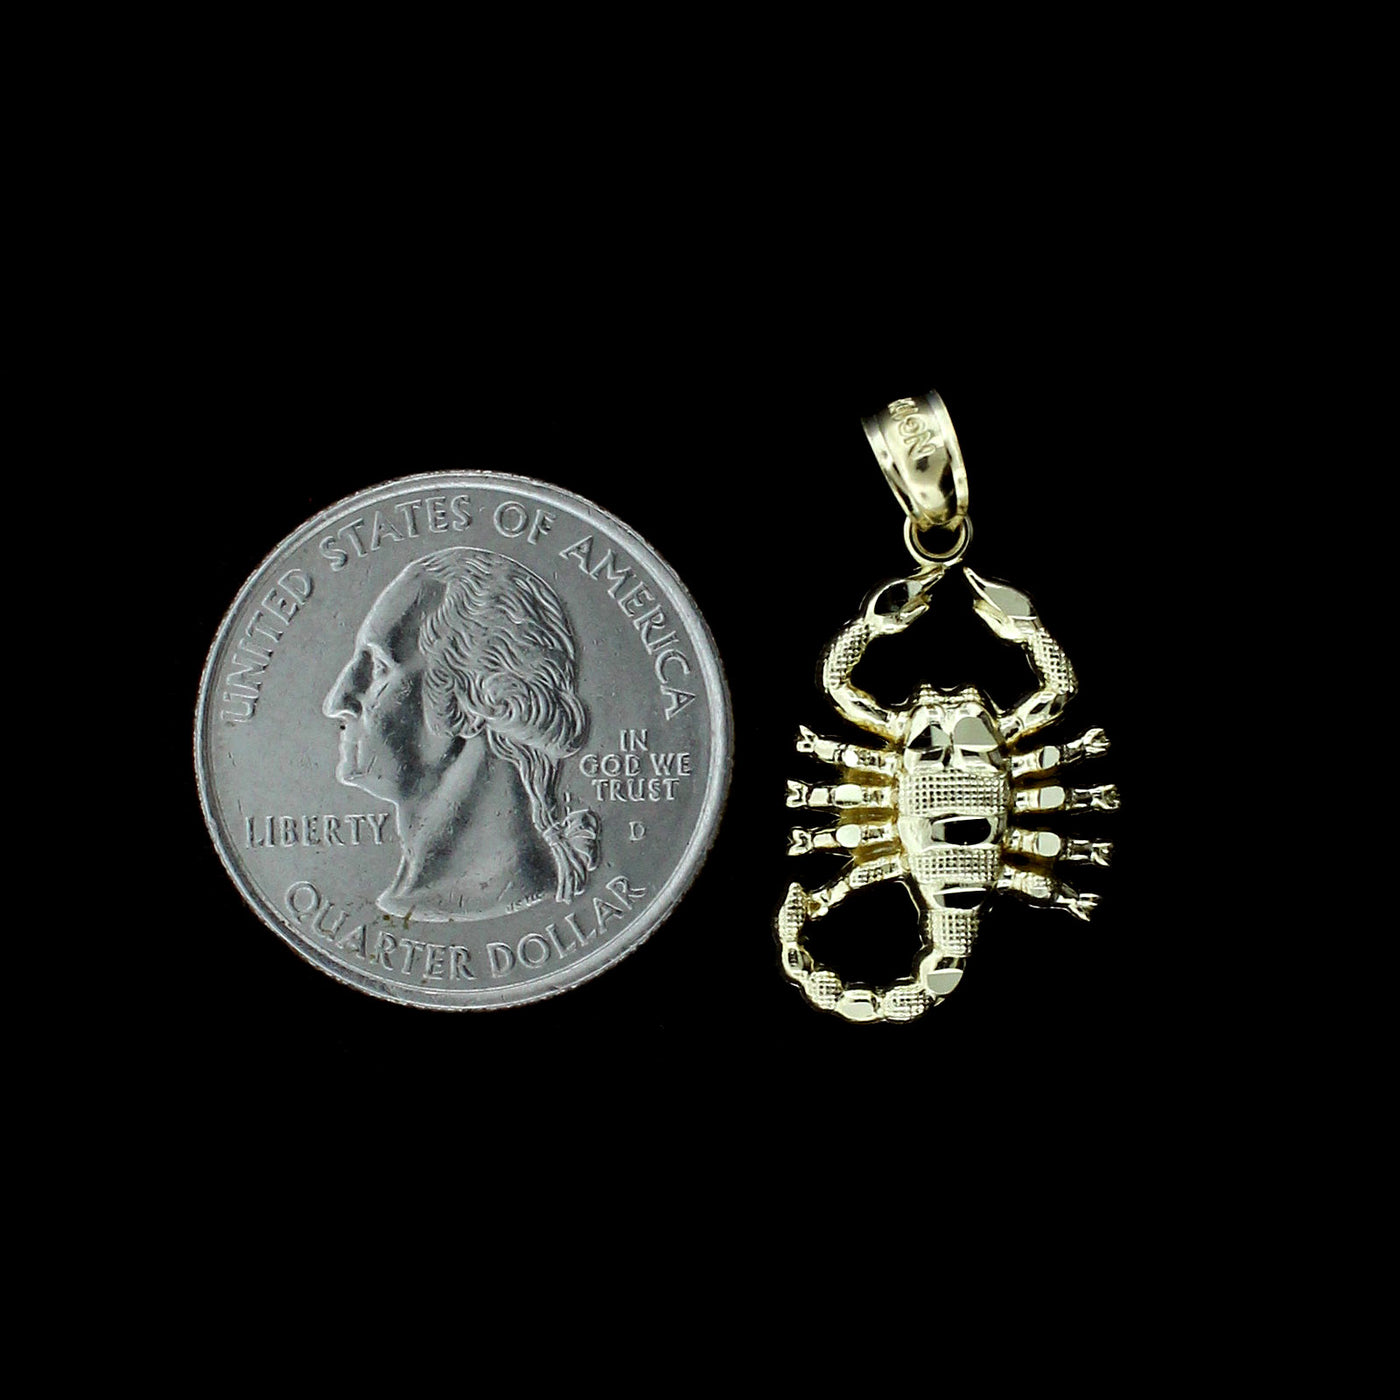 Real 10K Yellow Gold Zodiac Sign Scorpion Pendant & 2.5mm Rope Chain Necklace Set